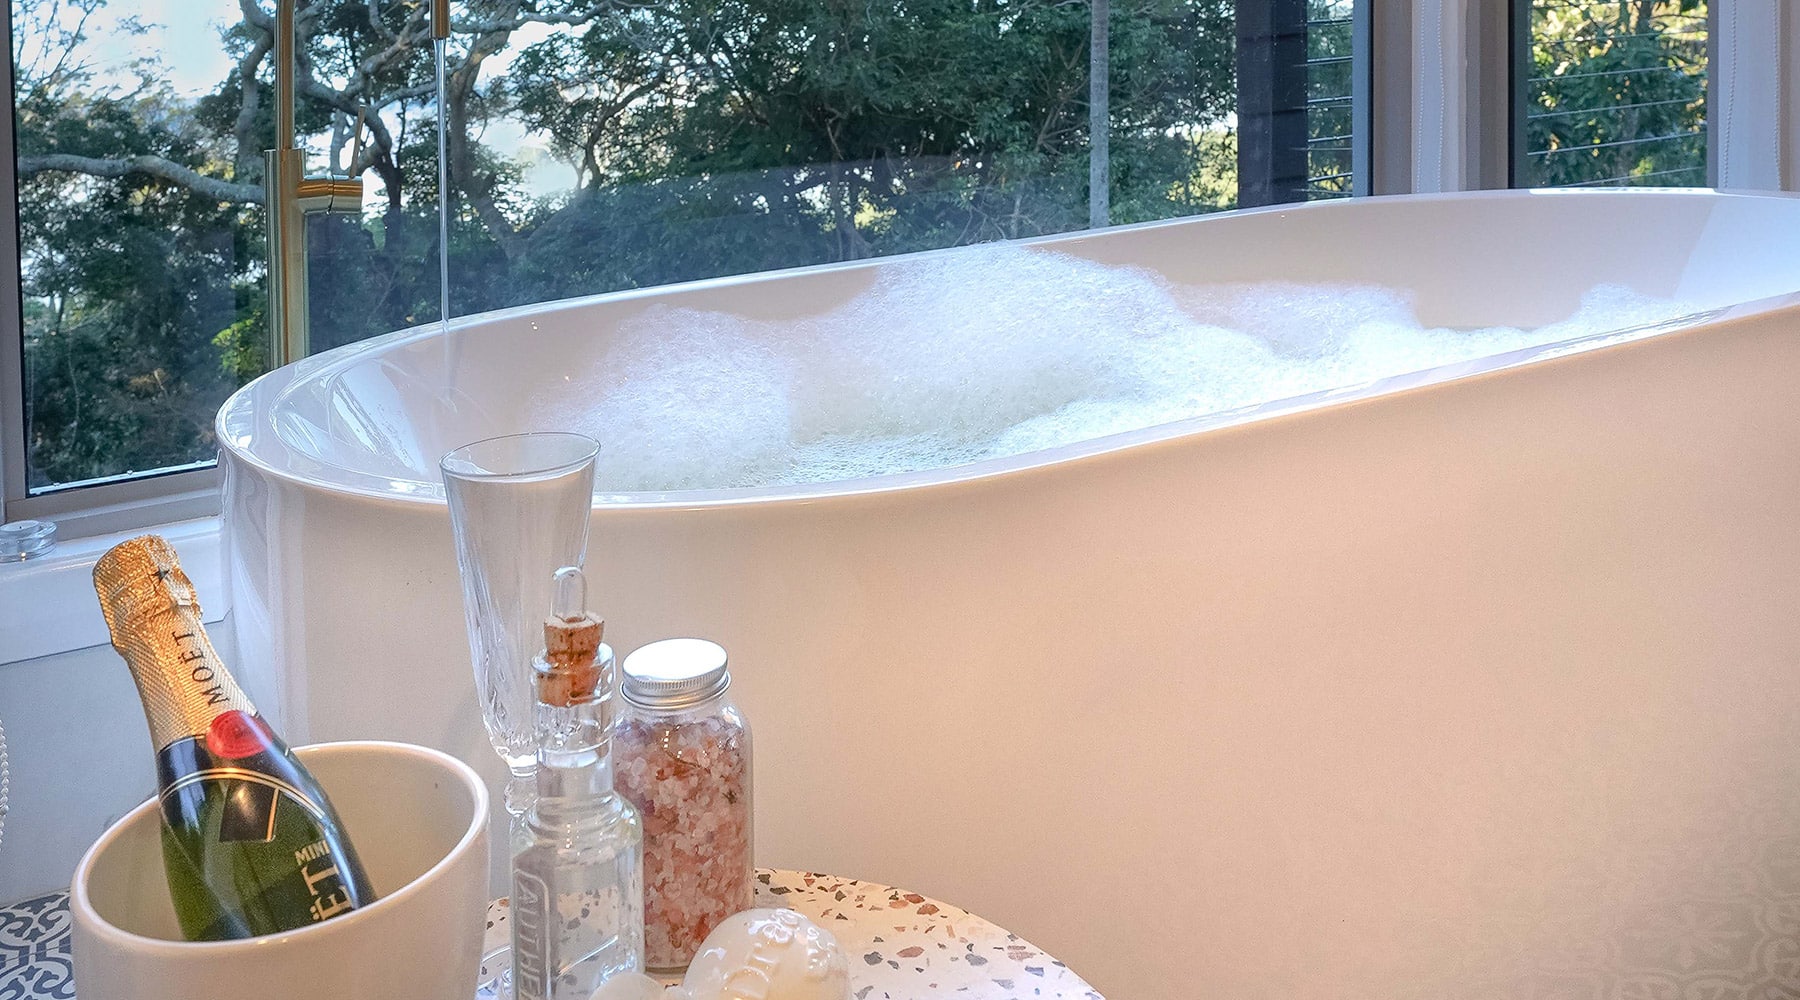 Lovestone Cottages Montville Quandong Cottage - bath tub and drink inclusions